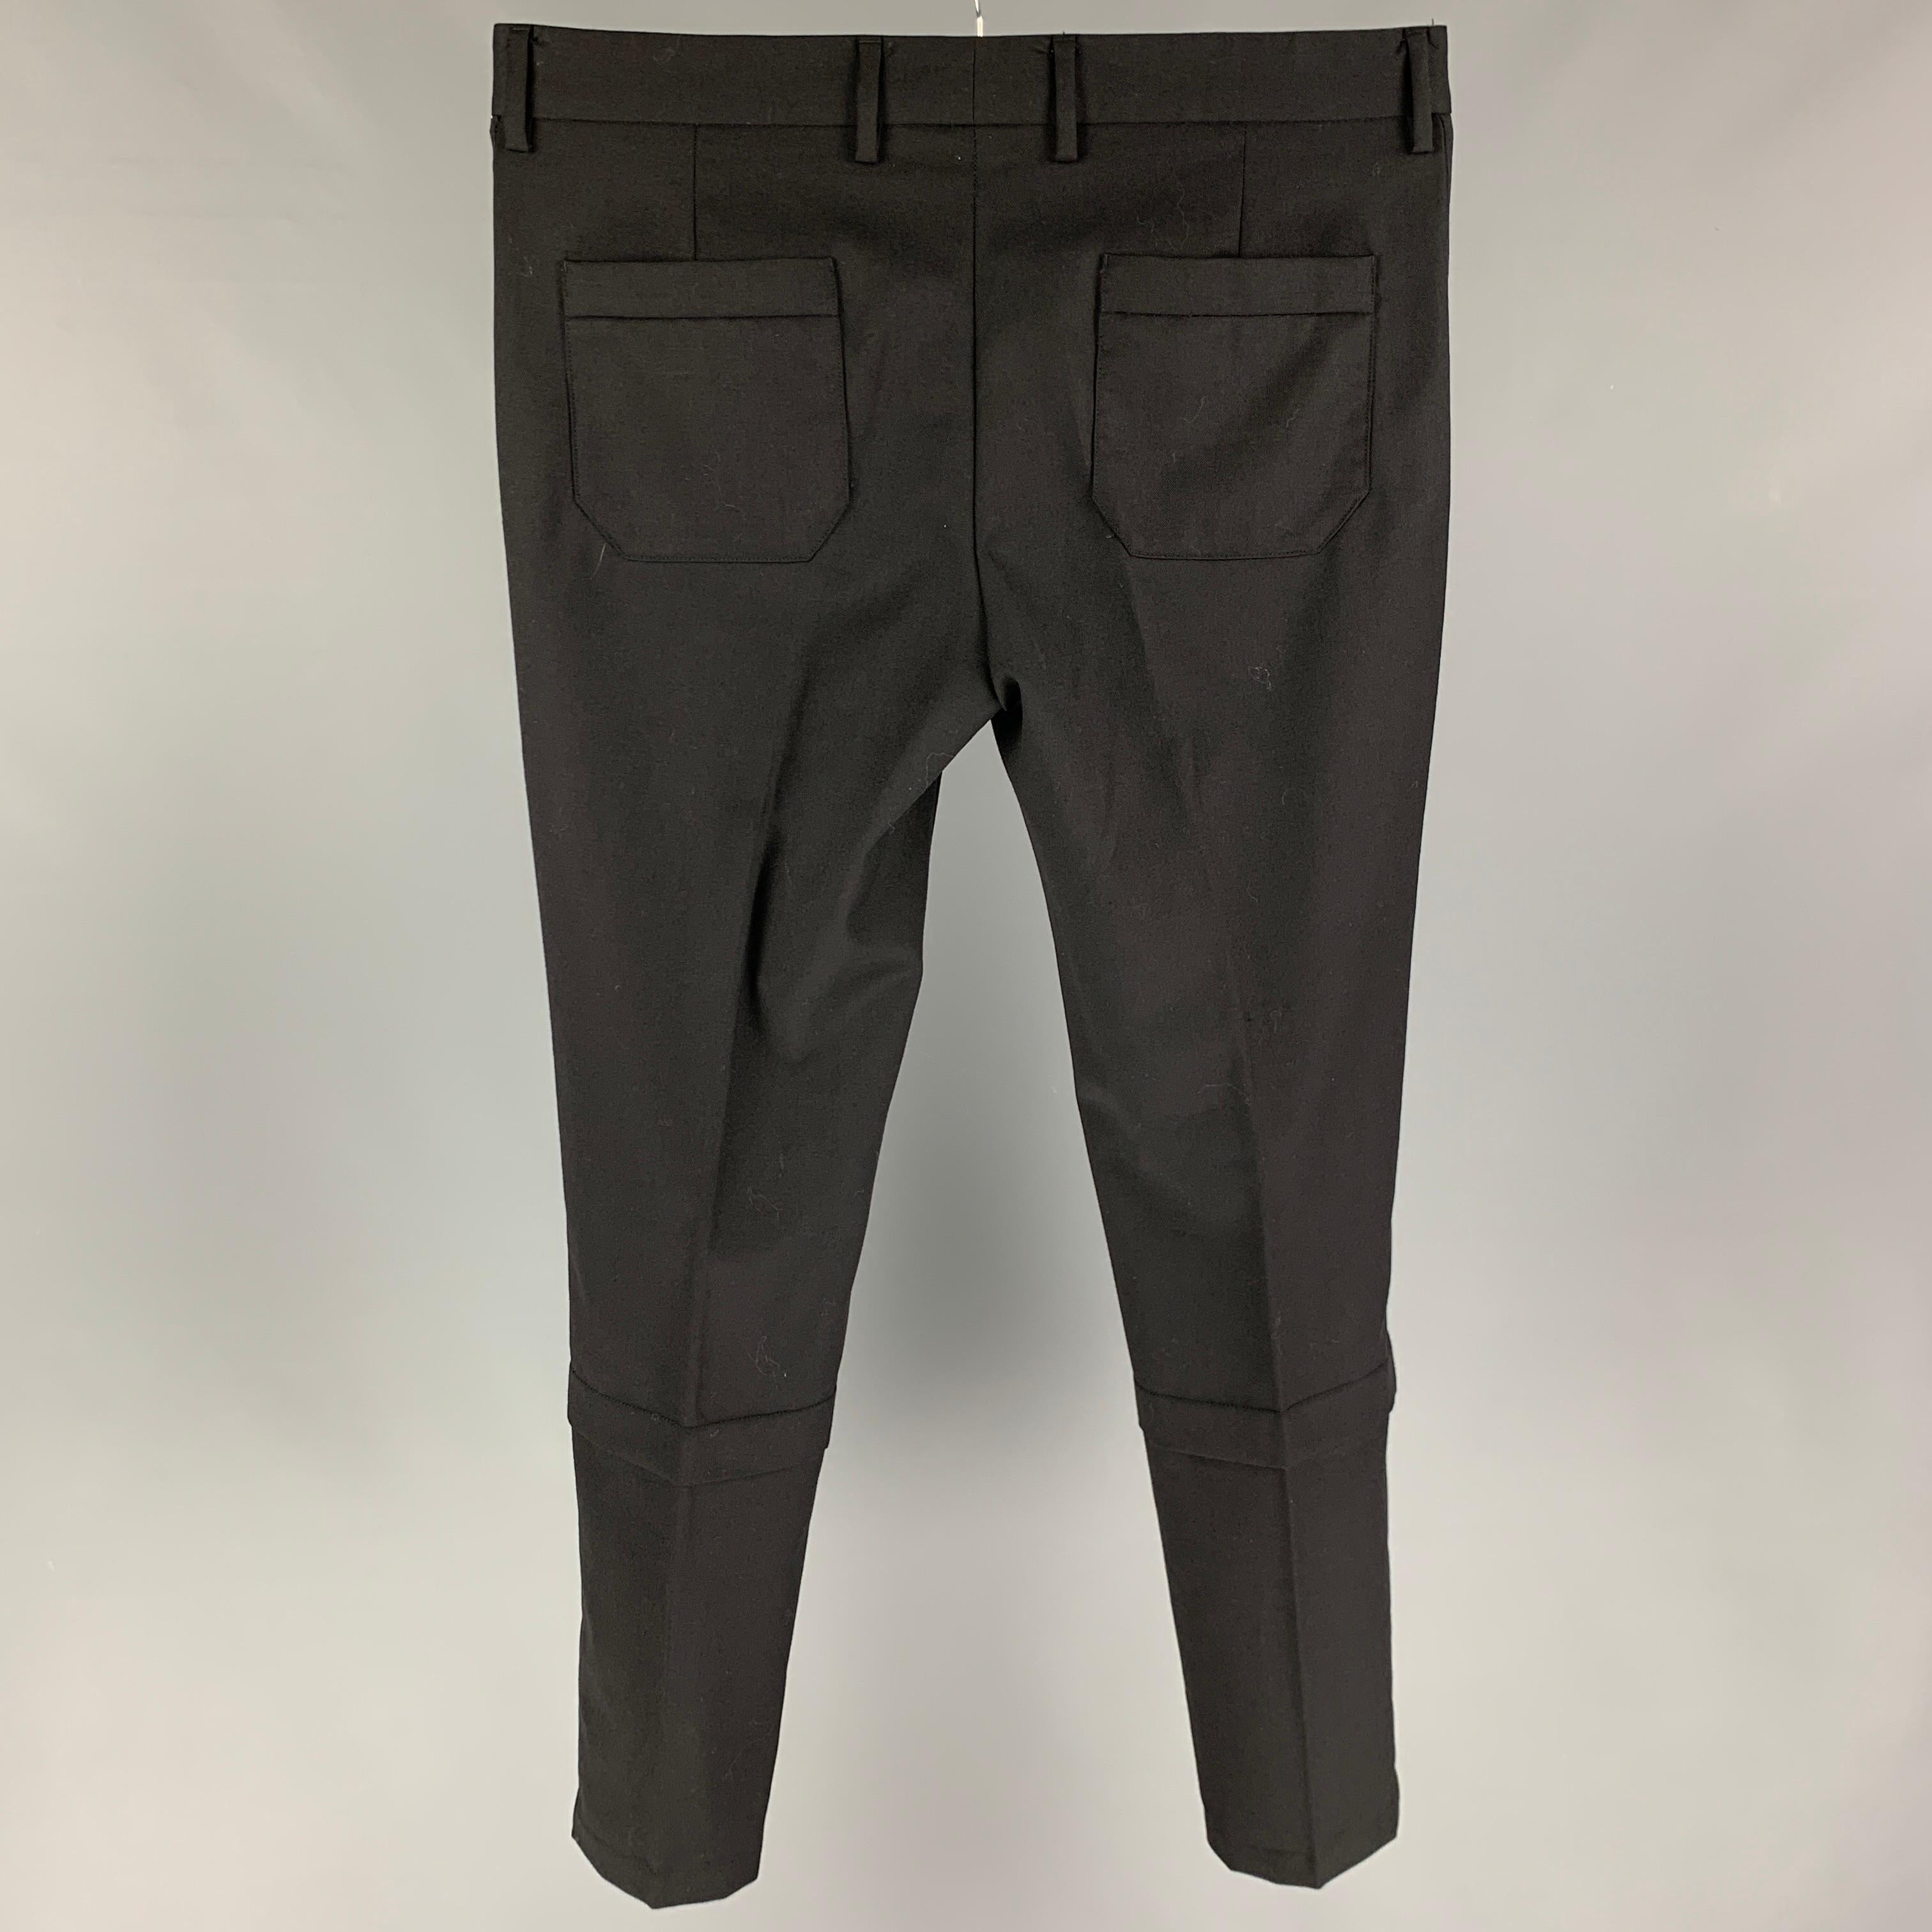 VIKTOR & ROLF pants comes in a black wool featuring a slim fit, front tab, and a zip fly closure. Made in Italy. 

Very Good Pre-Owned Condition.
Marked: 50

Measurements:

Waist: 34 in.
Rise: 9.5 in.
Inseam: 32 in. 